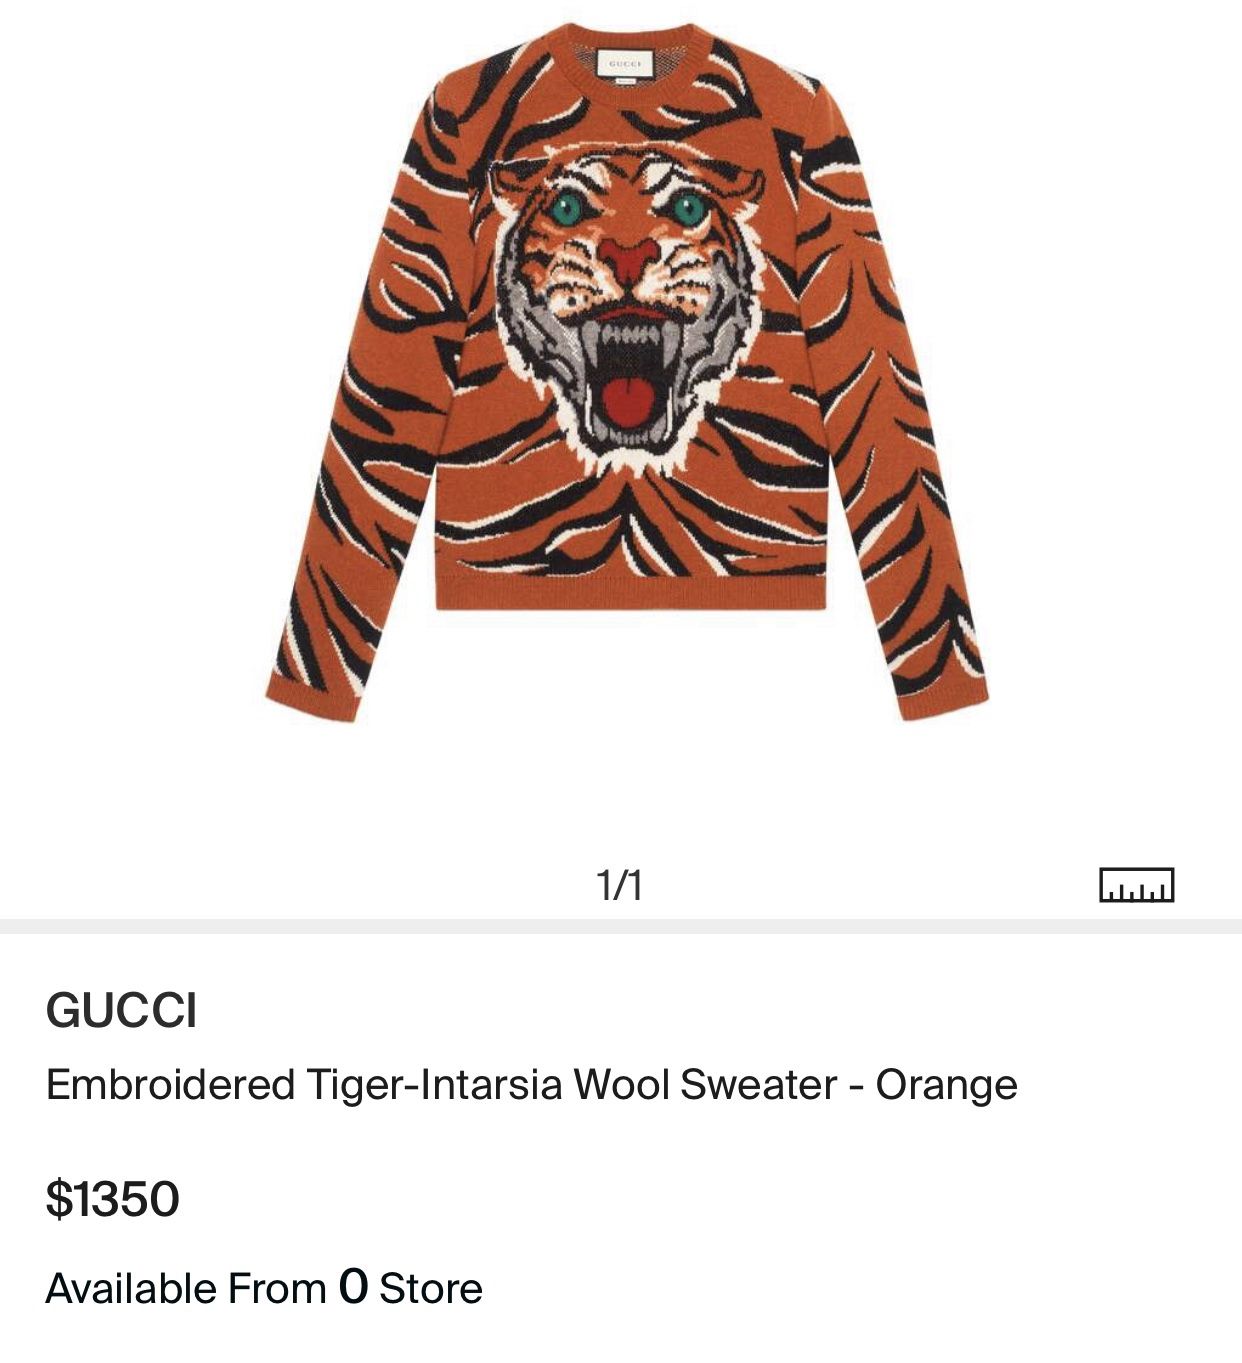 Real Gucci embroidered tiger sweater